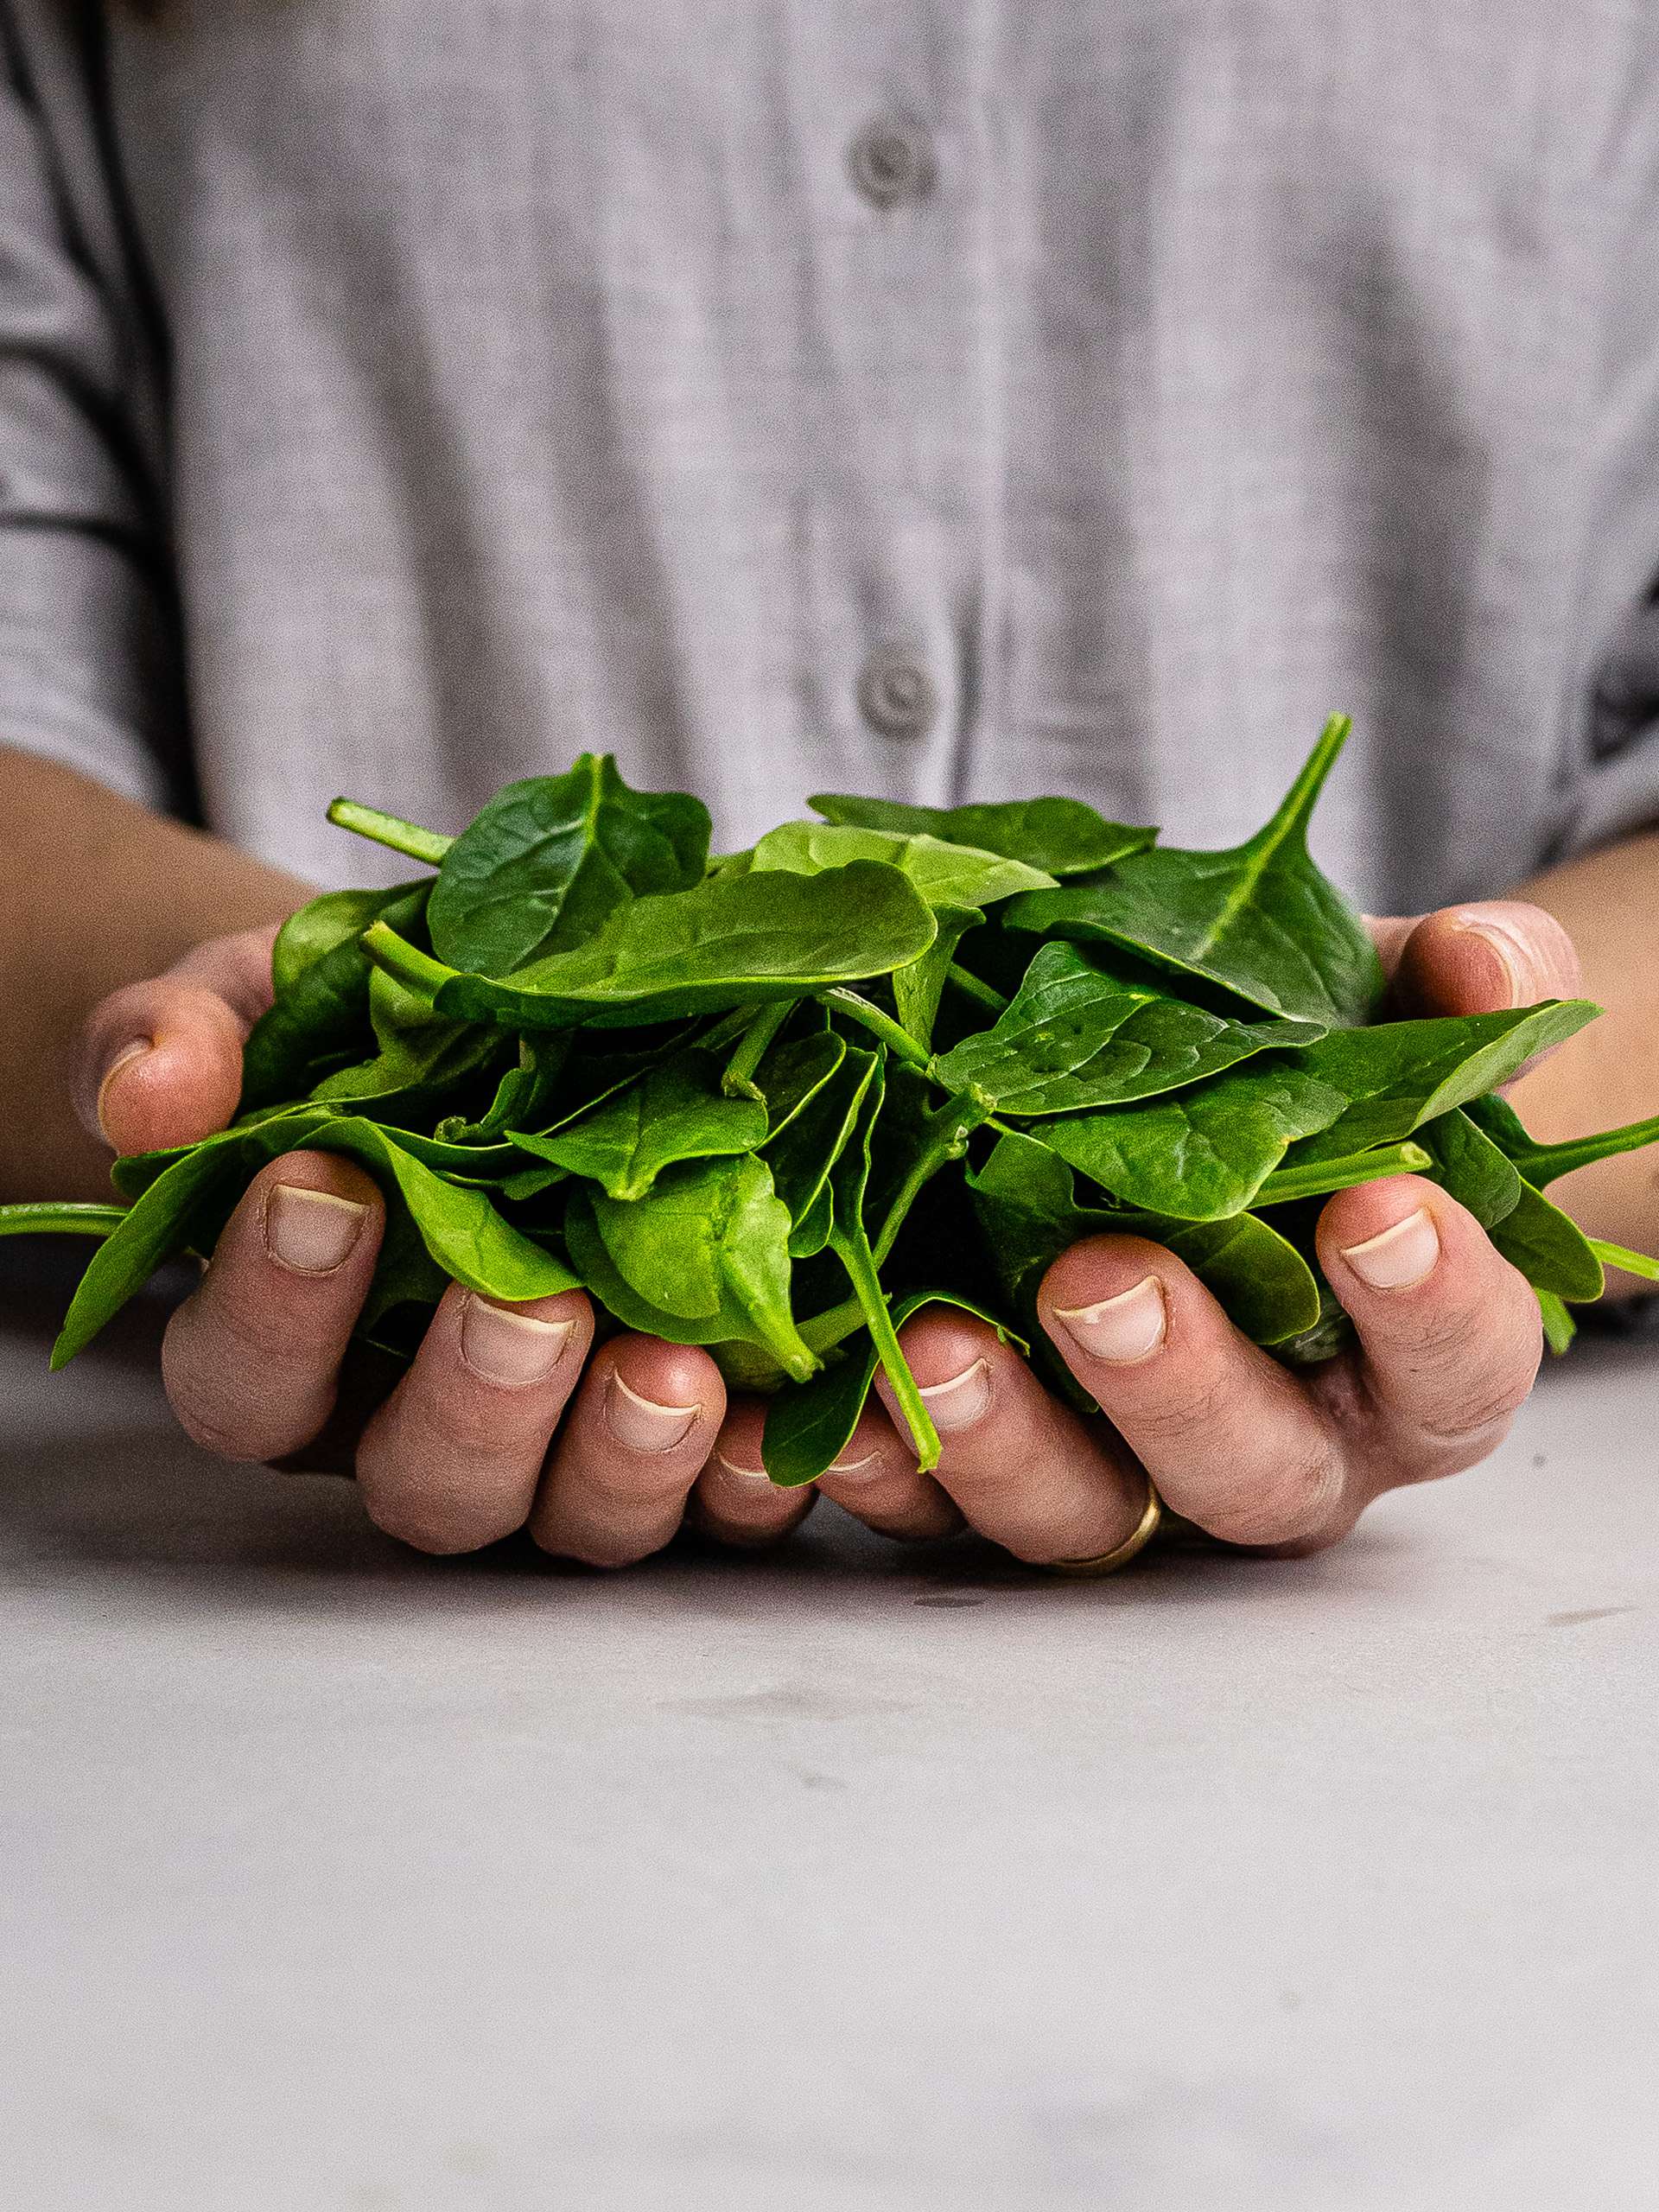 10 Easy Ways to Eat More Spinach